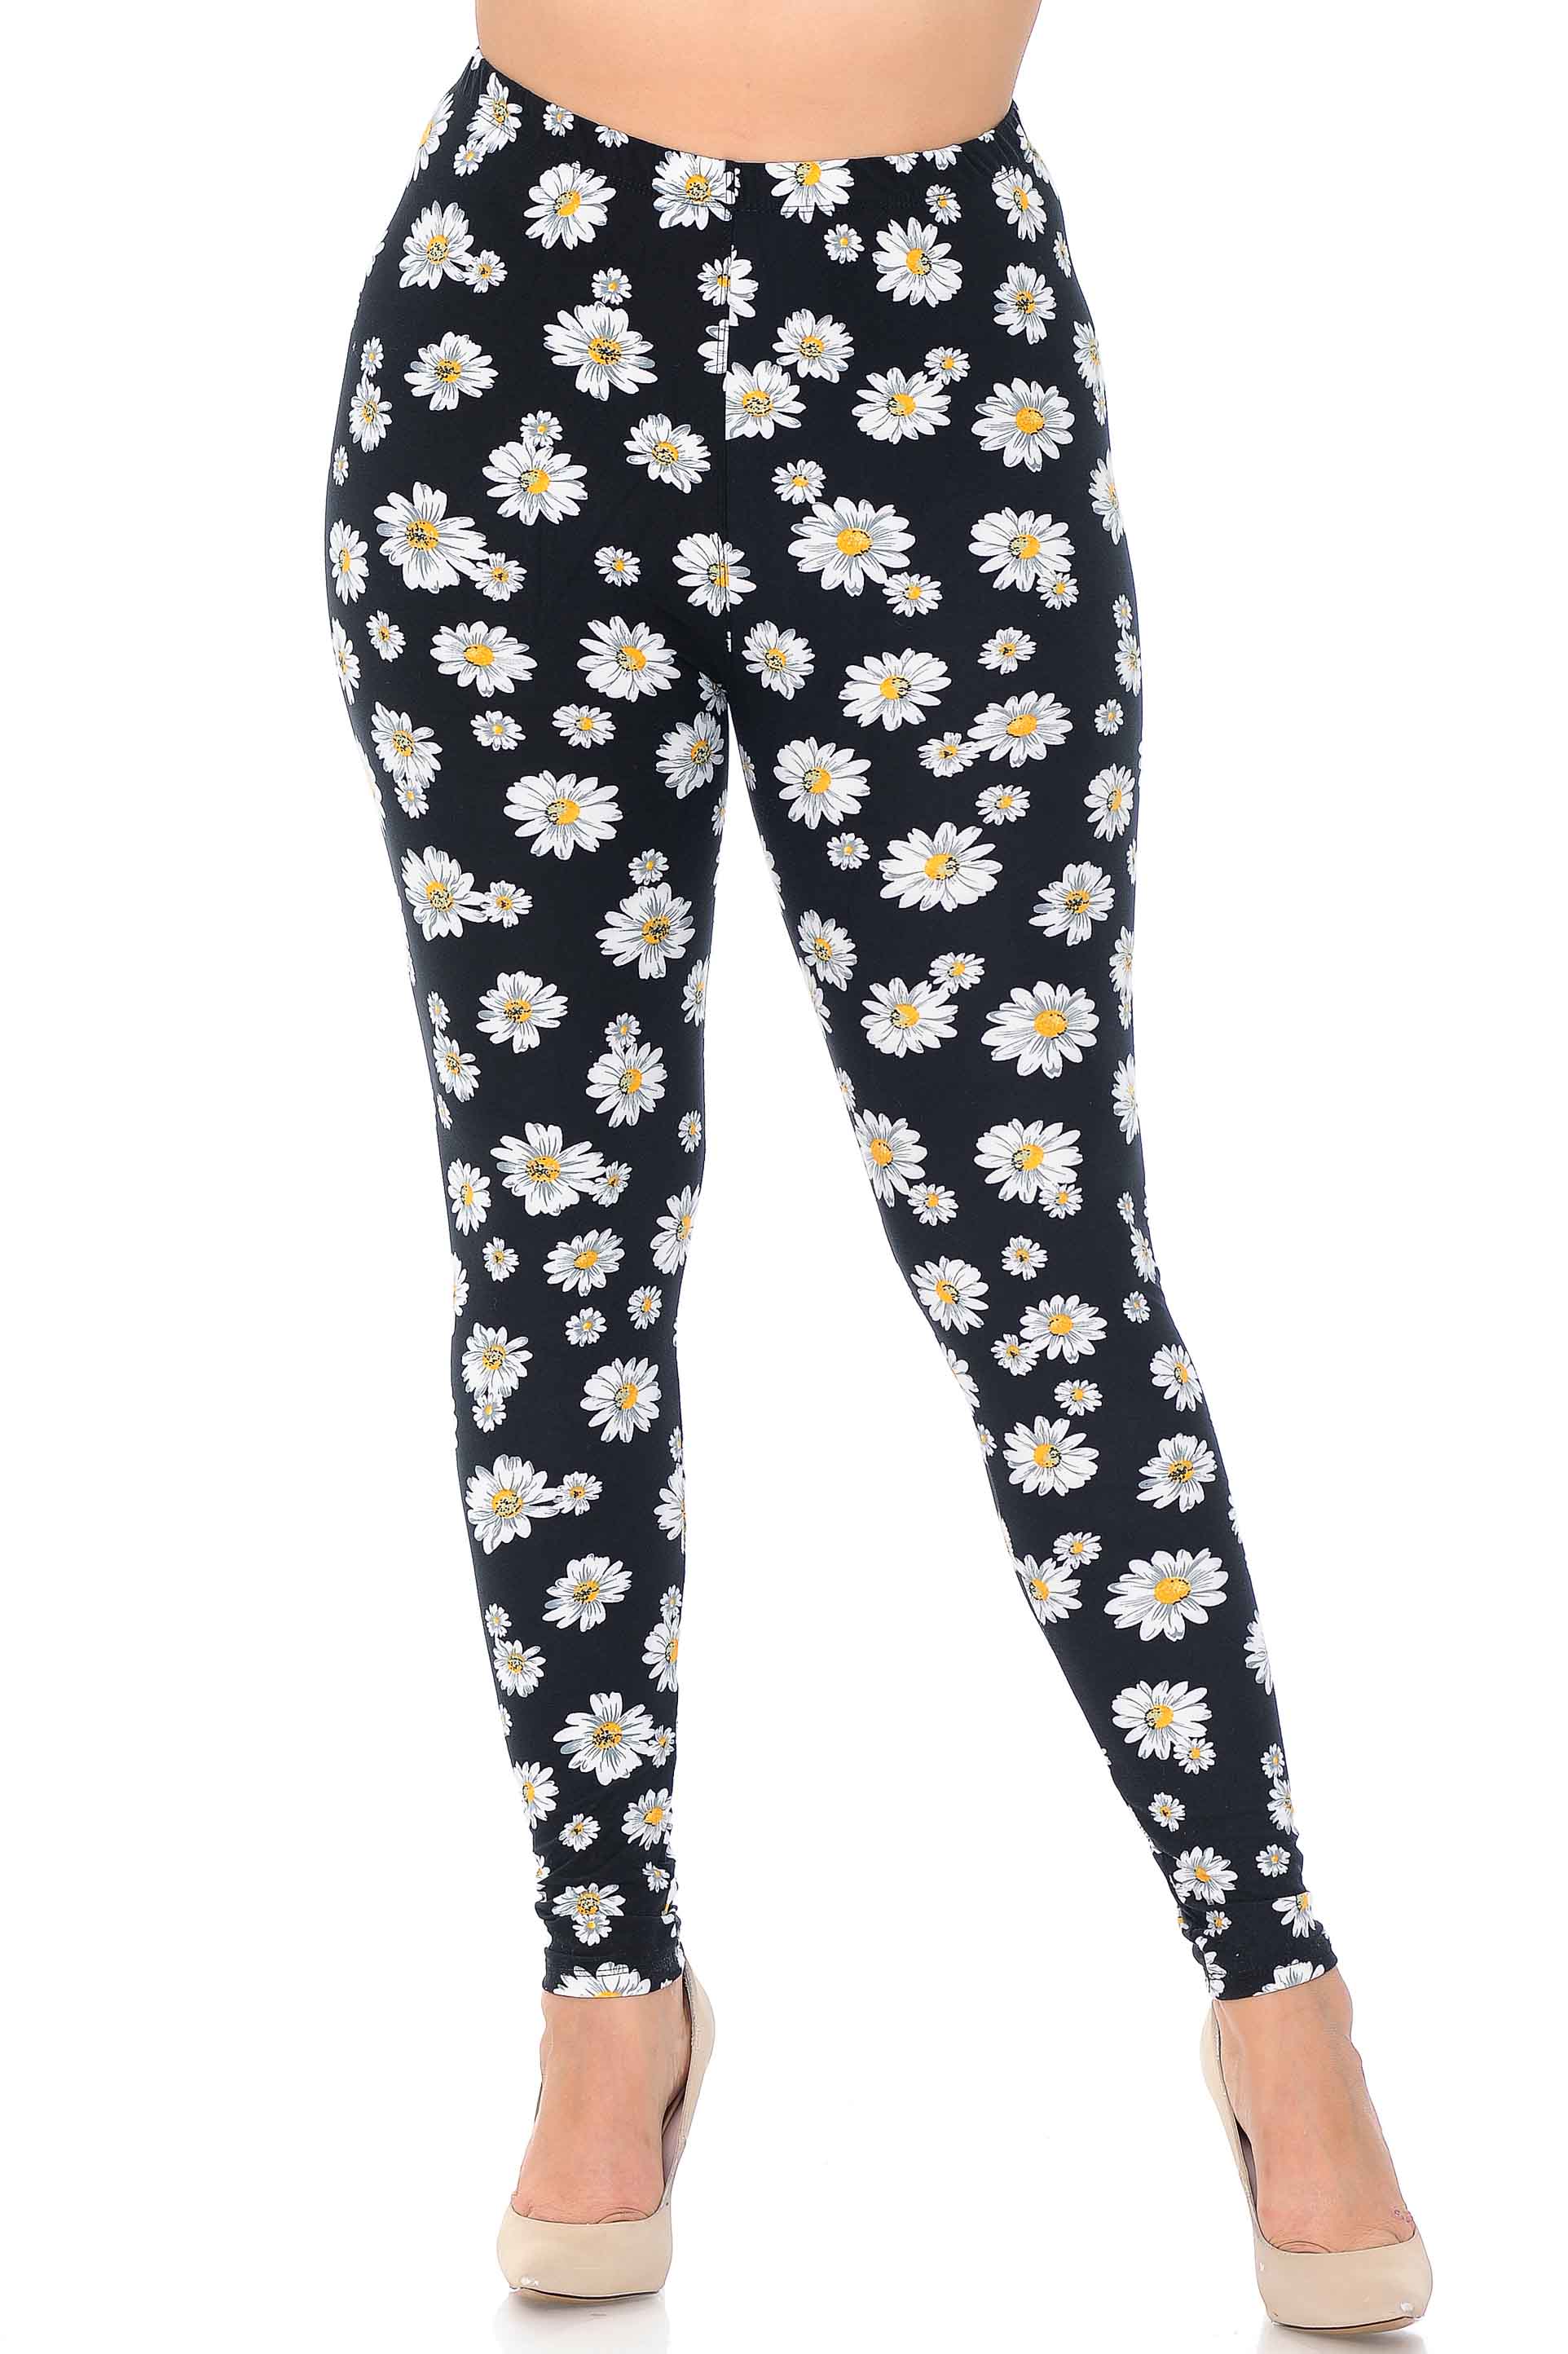 Wholesale Buttery Smooth Daisy Extra Plus Size Leggings - 3X-5X